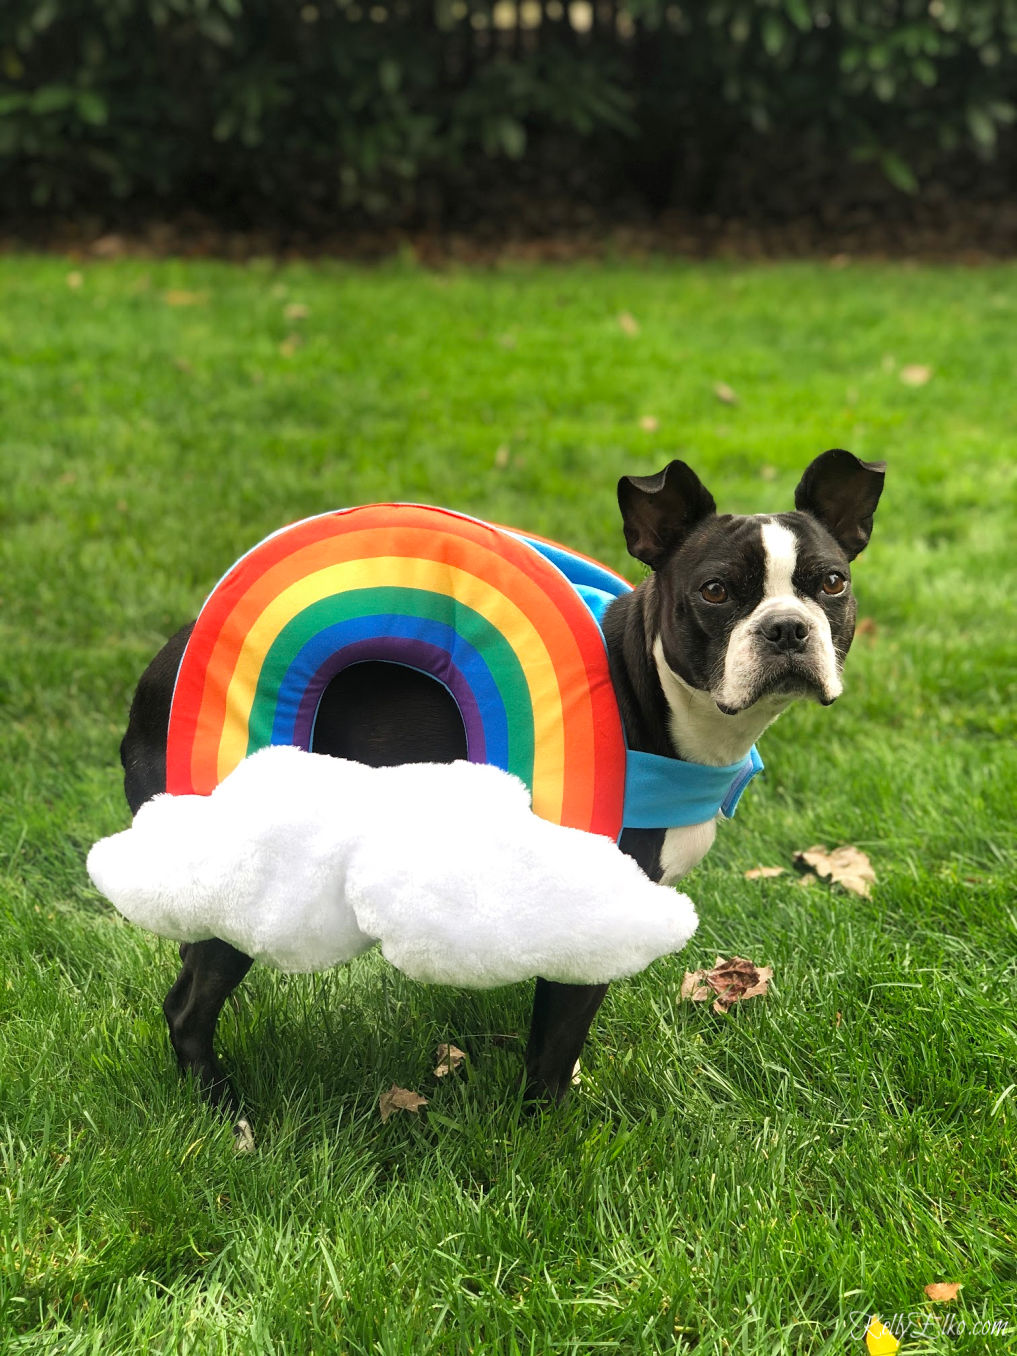 How adorable is this dog rainbow costume! The Boston Terrier is so cute too kellyelko.com #halloween #halloweencostume #rainbow #petcostume #dogcostume #bostonterrier 